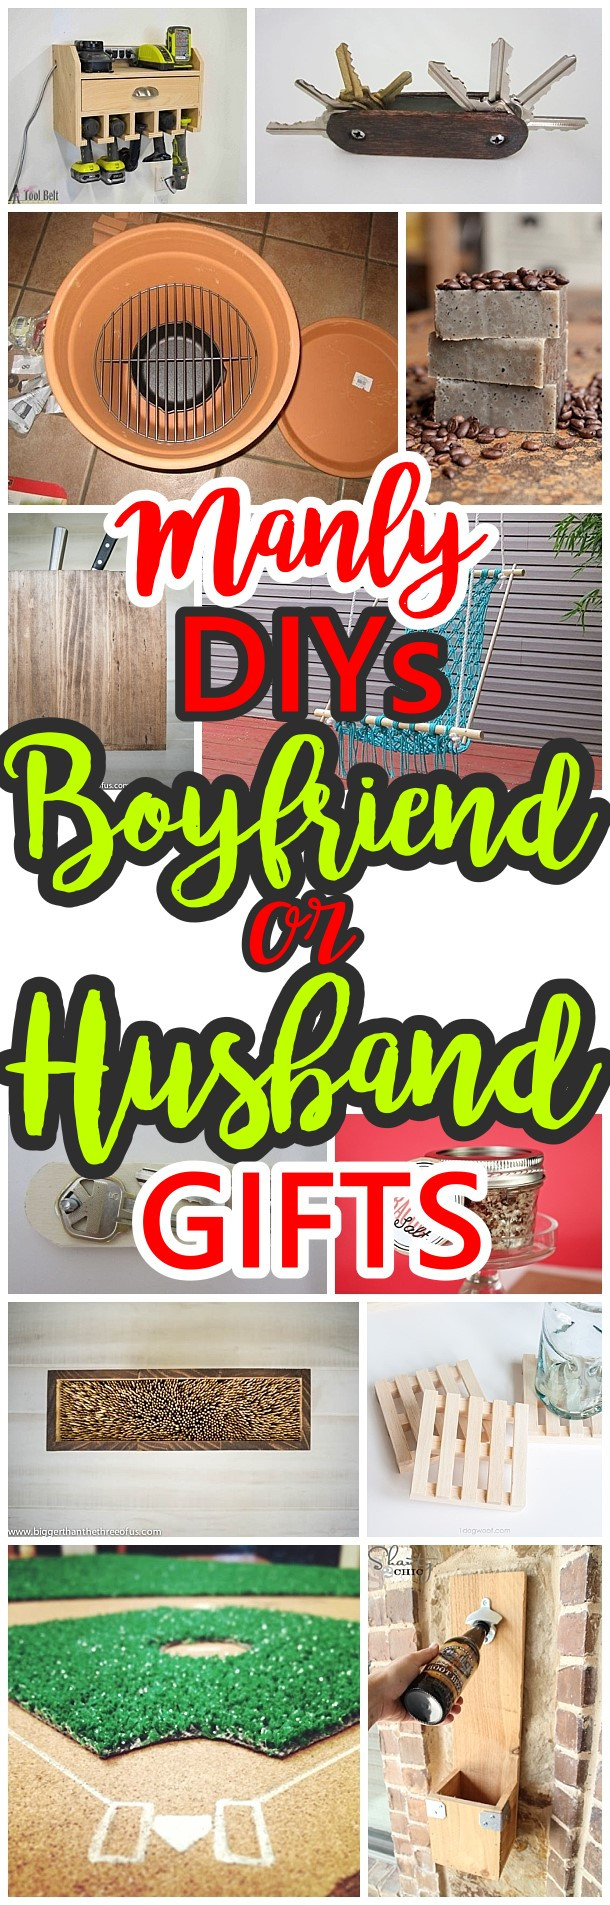 DIY Father'S Day Gifts For Husband
 Manly Do It Yourself Boyfriend and Husband Gift Ideas